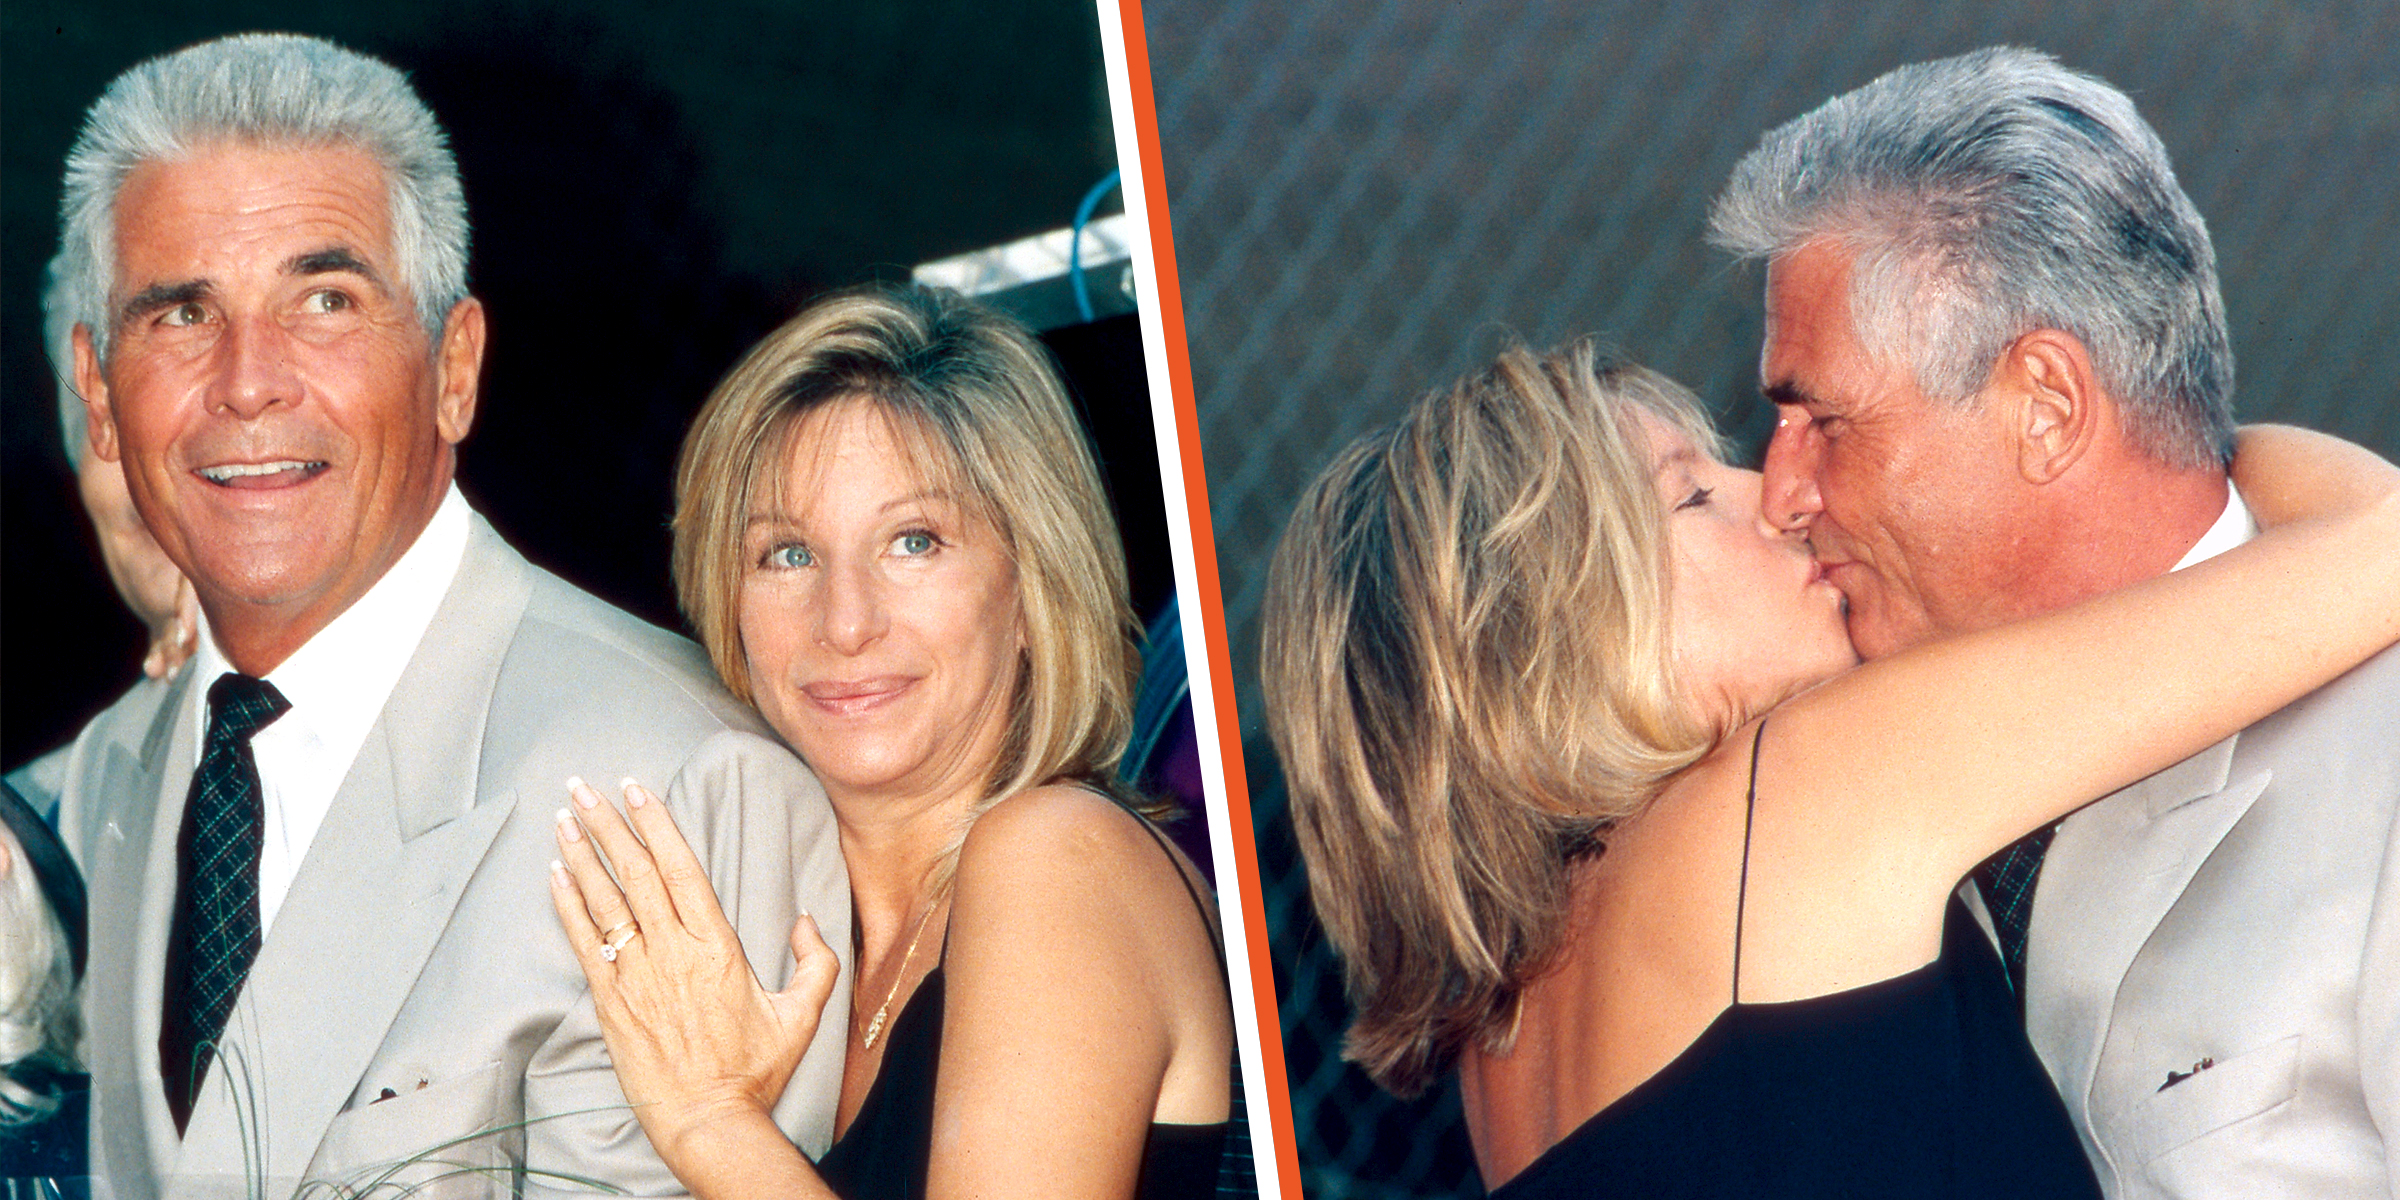 Barbra Streisand and her husband James Brolin | Source: Getty Images